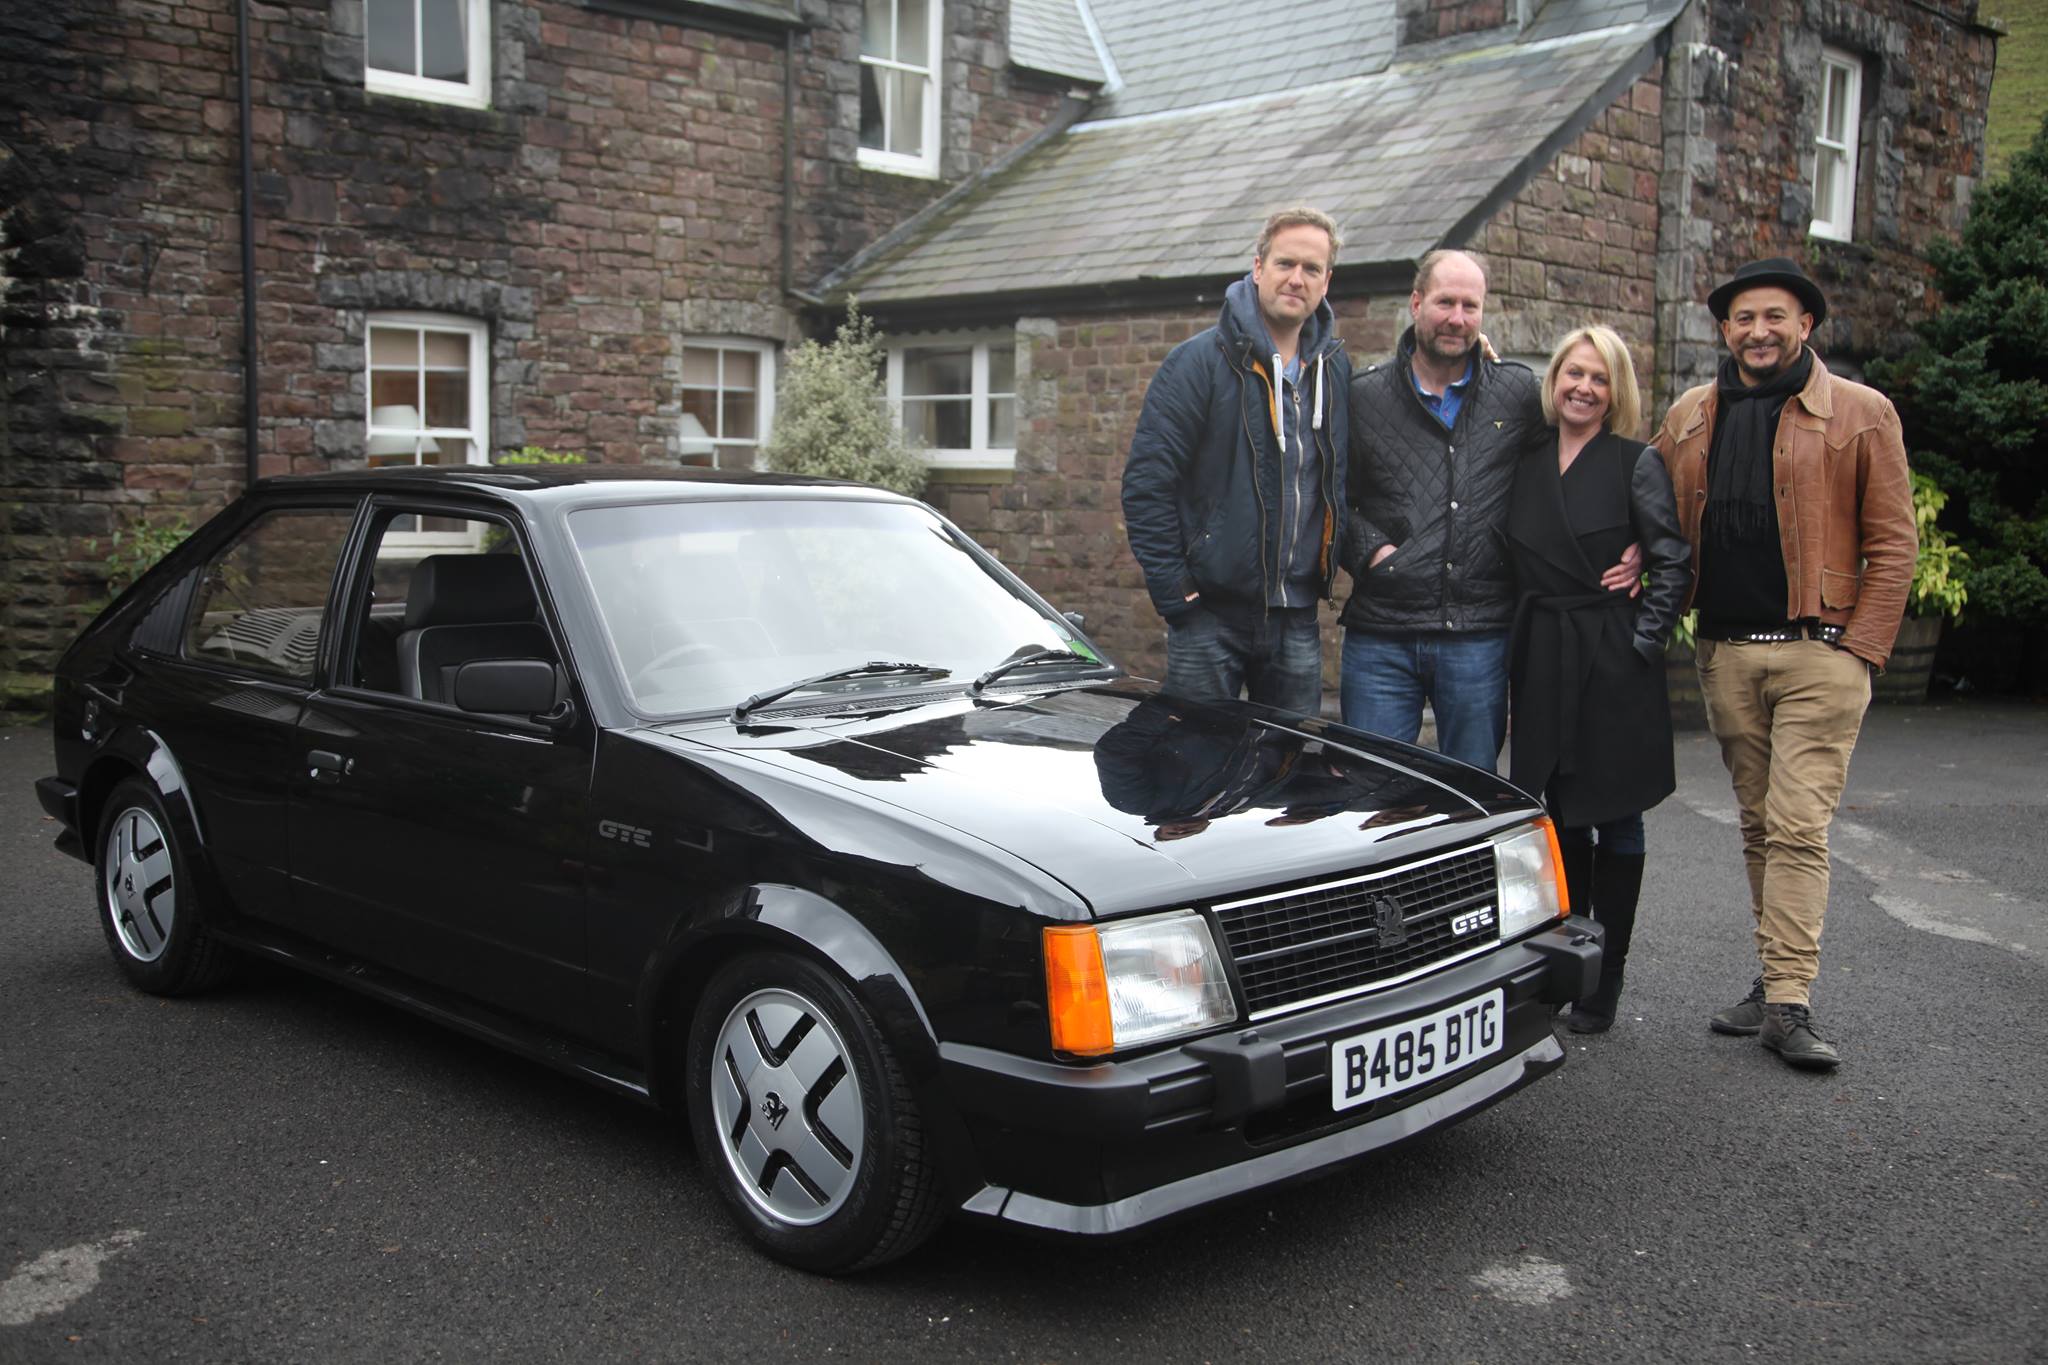 Newport Woman And Car Sos Tv Show Restore Prize Car For New Inn Brain Tumour Victim South Wales Argus